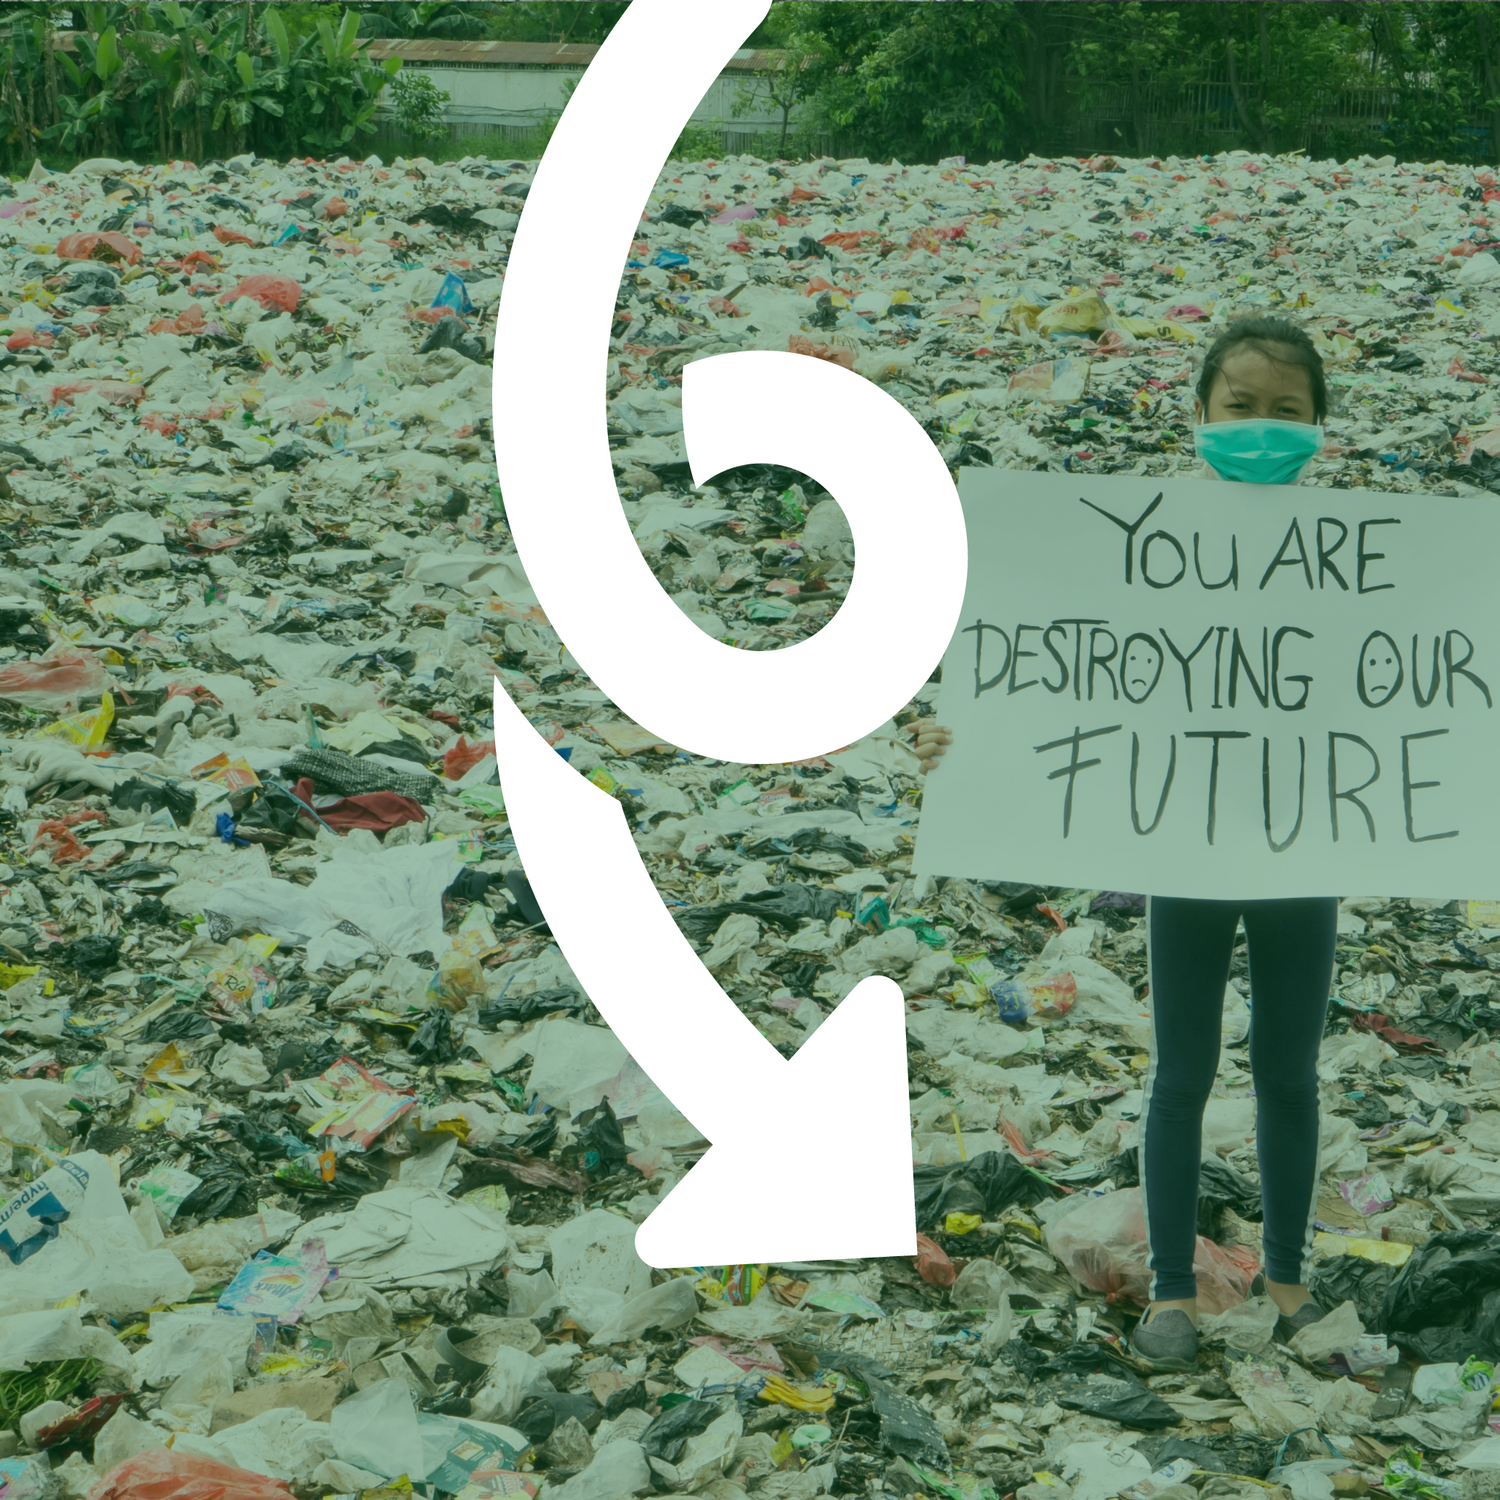 A girl stands over a sea of plastic waste and pollution with a sign reading: You are destroying our future. She is wearing a facemask. There is a white arrow over the image pointing down.